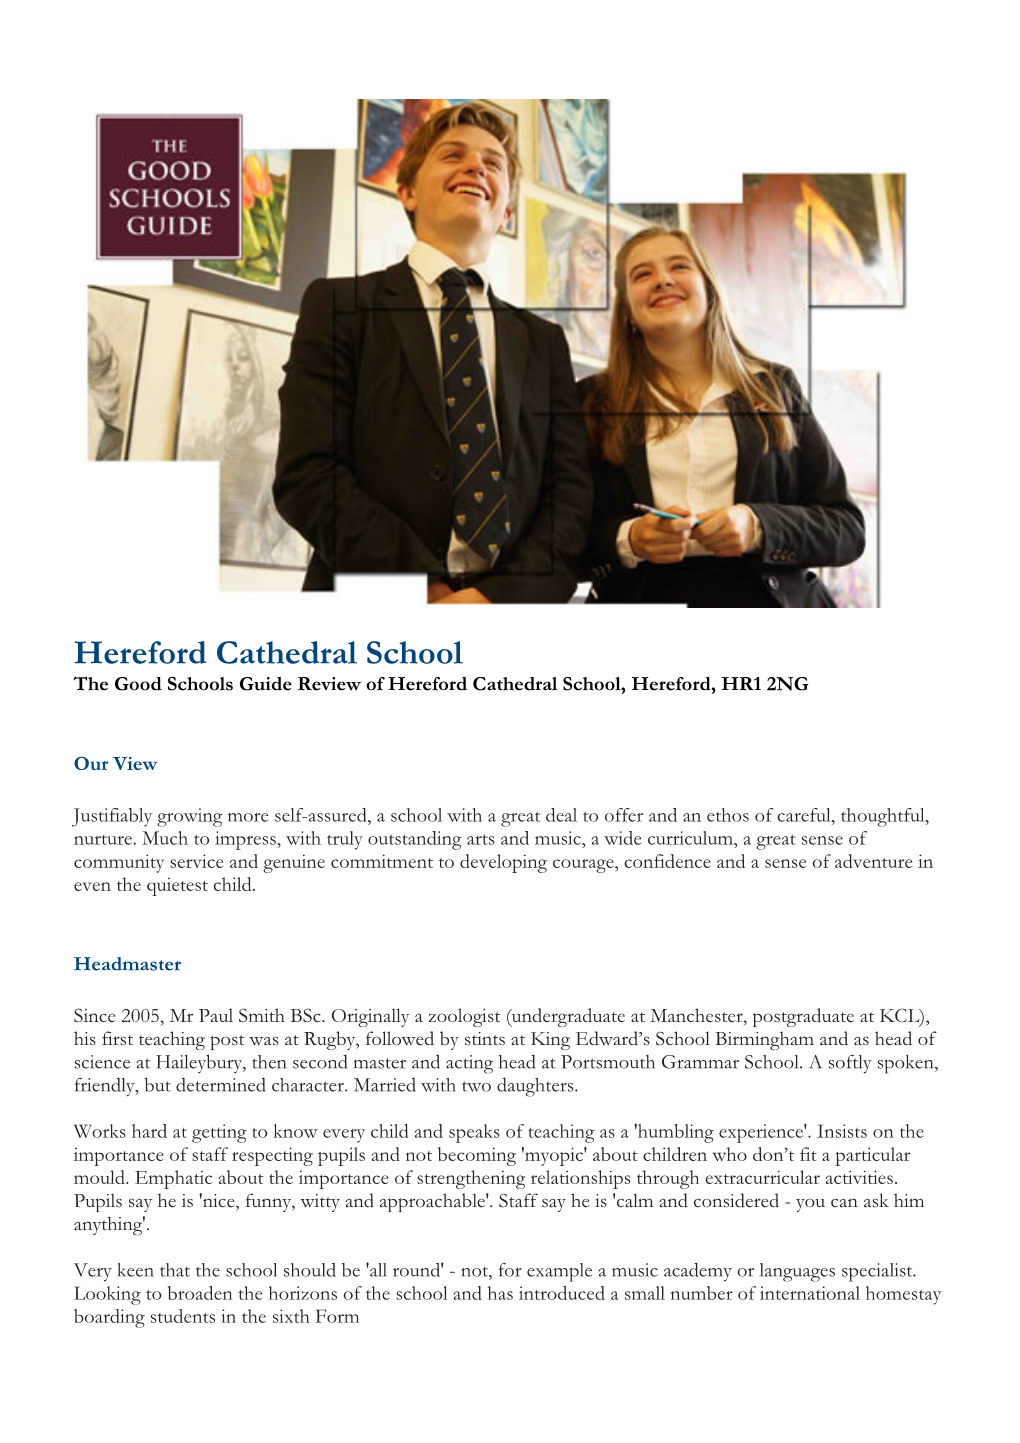 The Good Schools Guide Review of Hereford Cathedral School, Hereford, HR1 2NG